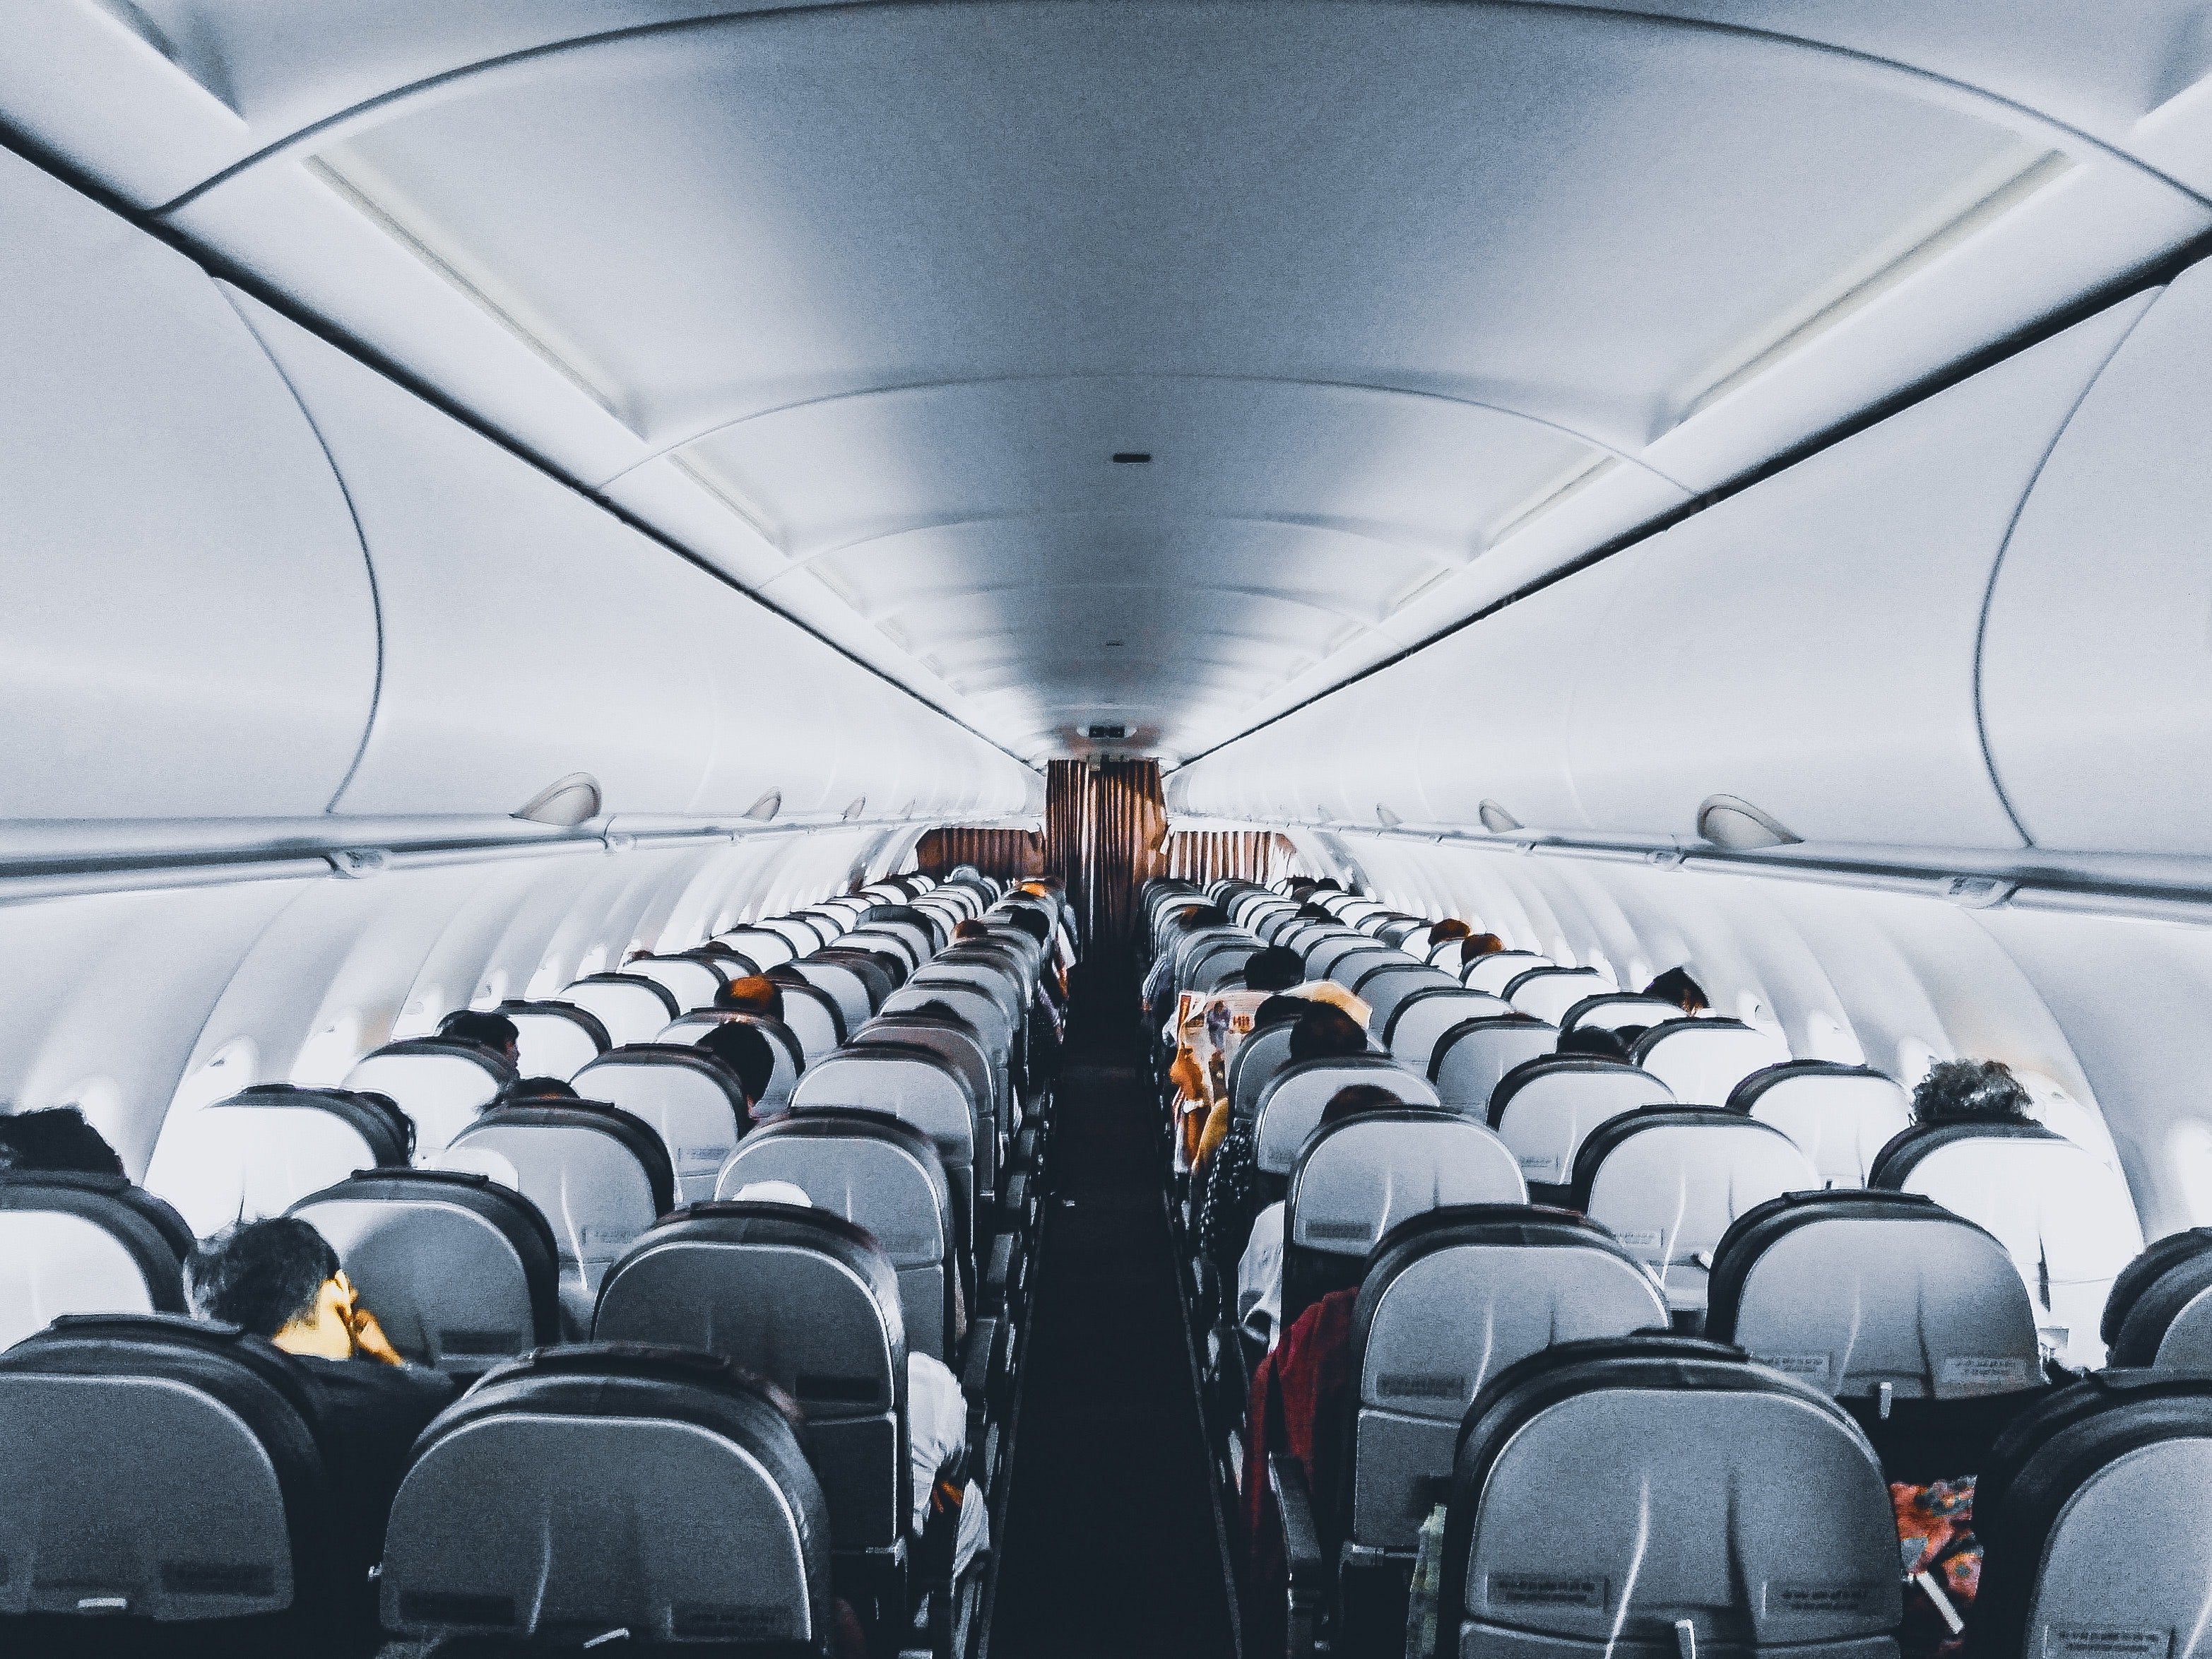 The cabin went silent, and the passengers stared dumbfounded as one of them treated Rhea like a human  | Source: Pexels